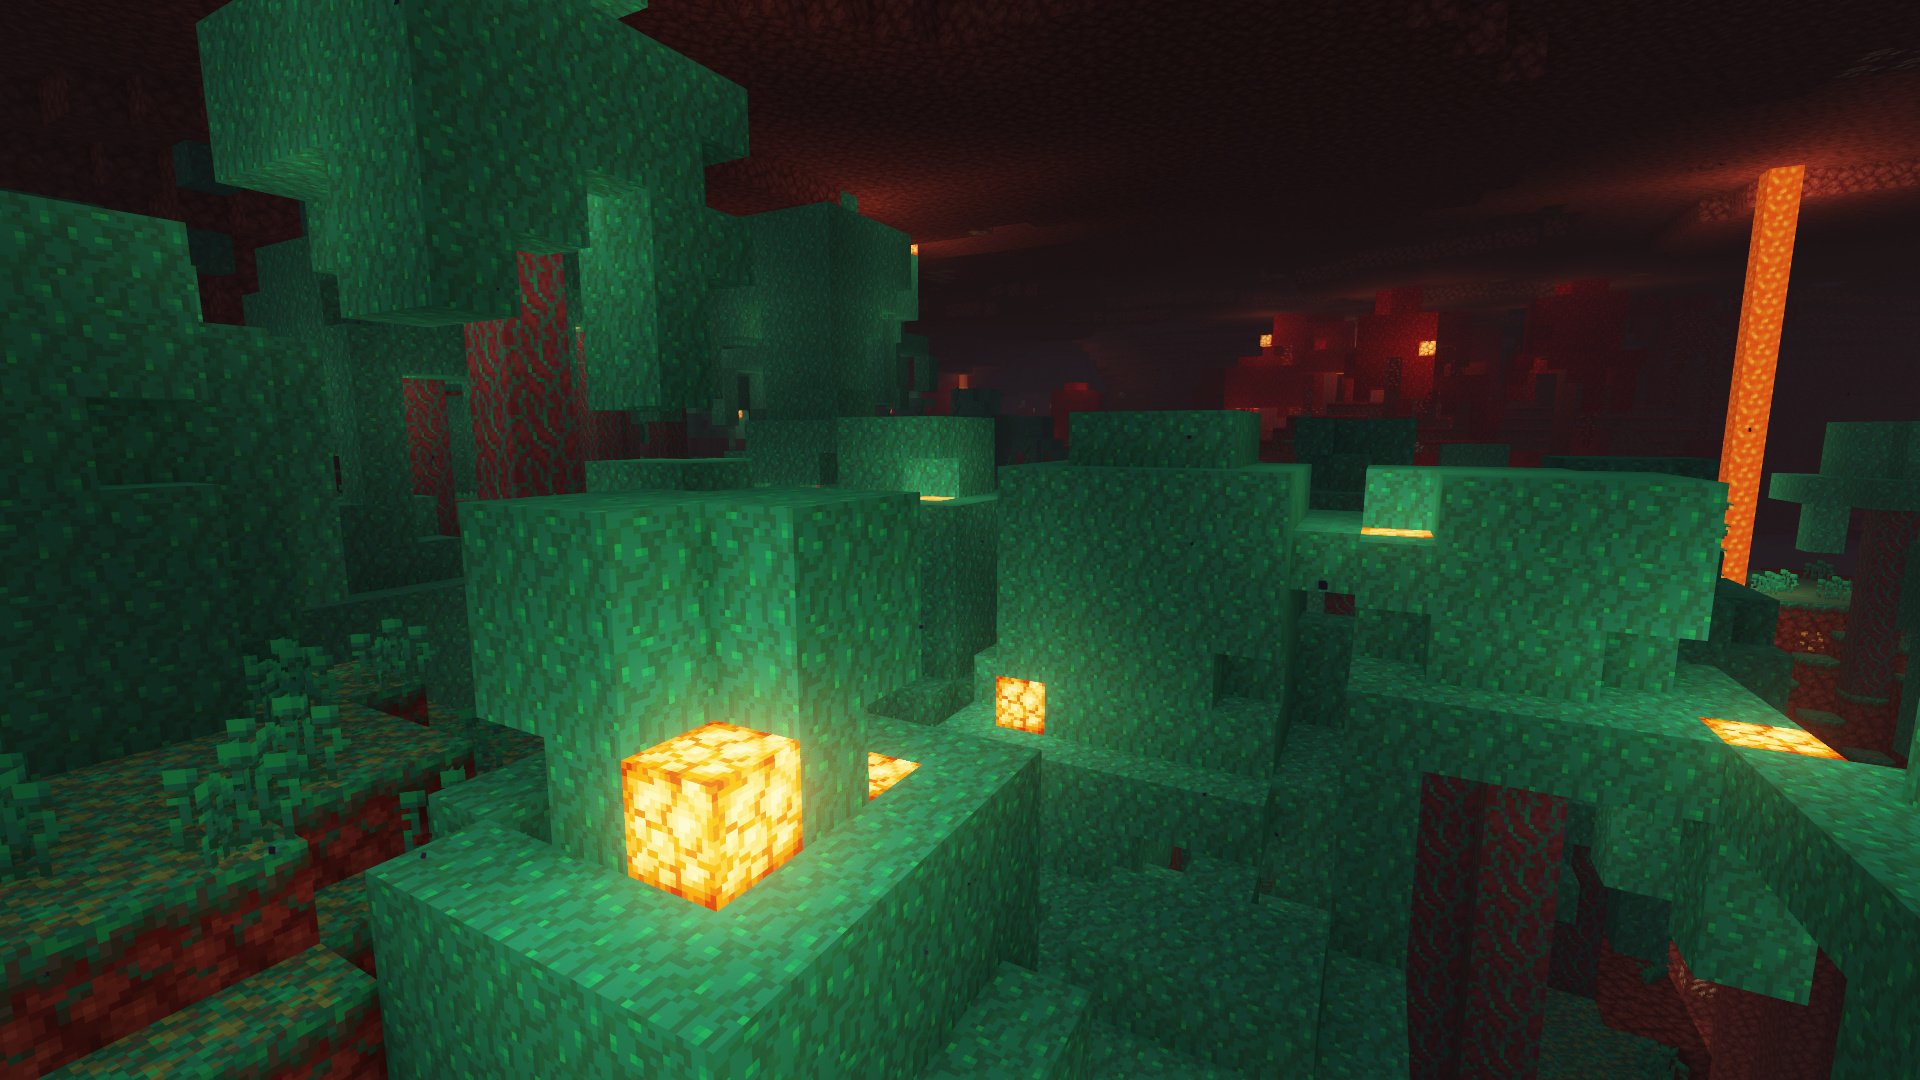 Nether forest II